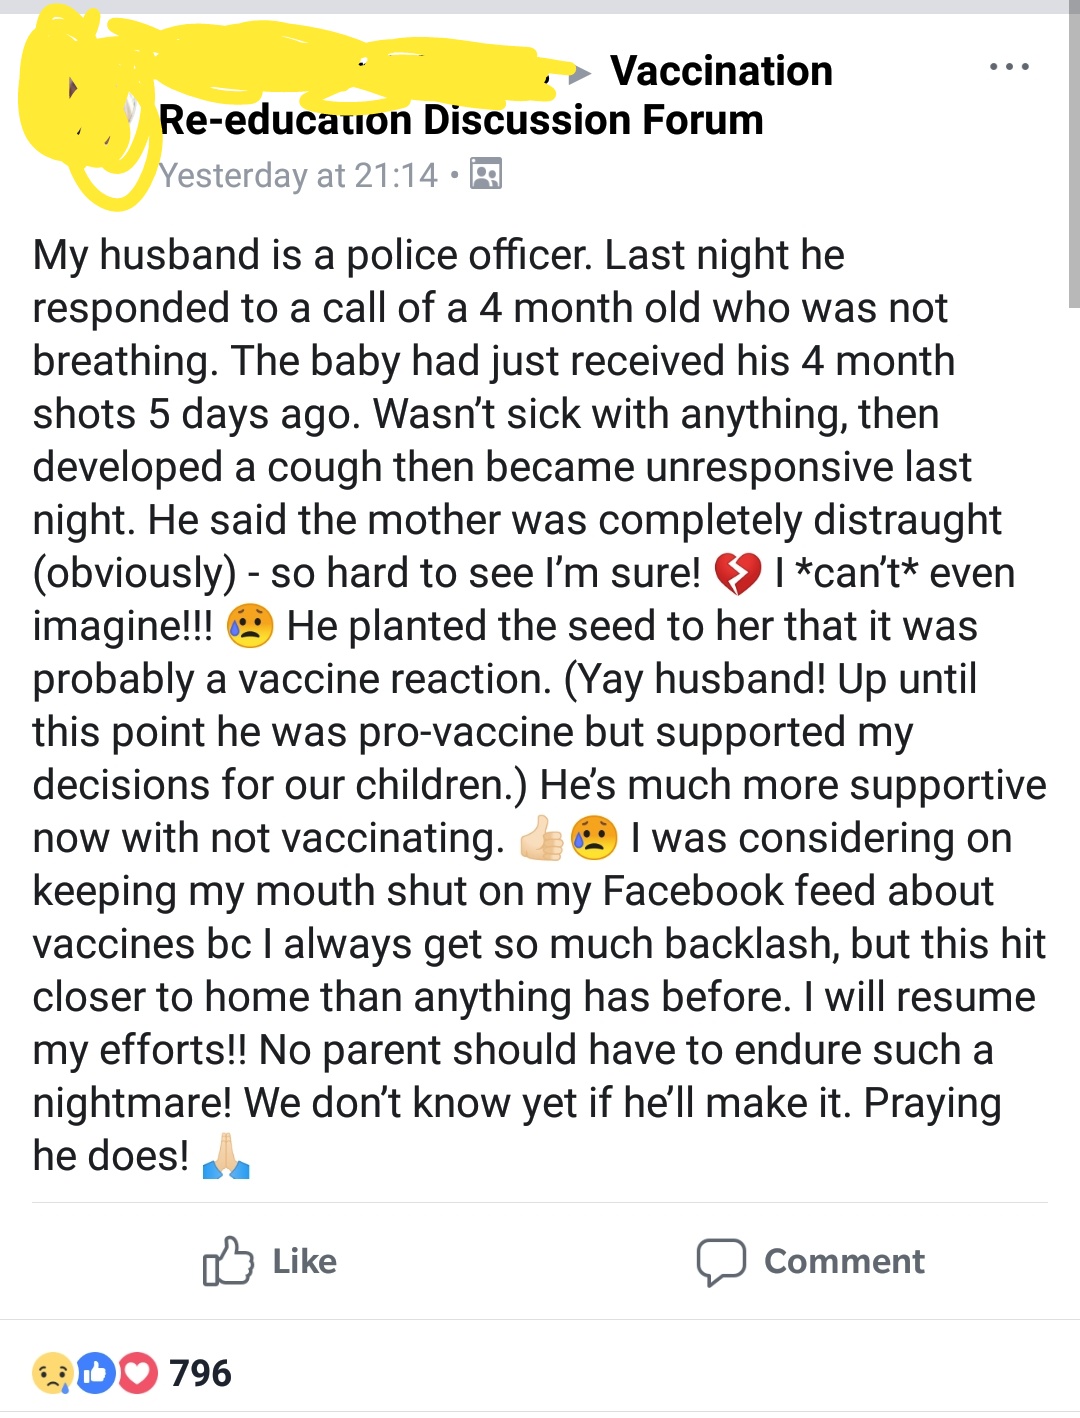 document - Vaccination Reeducauon Discussion Forum Yesterday at My husband is a police officer. Last night he responded to a call of a 4 month old who was not breathing. The baby had just received his 4 month shots 5 days ago. Wasn't sick with anything, t